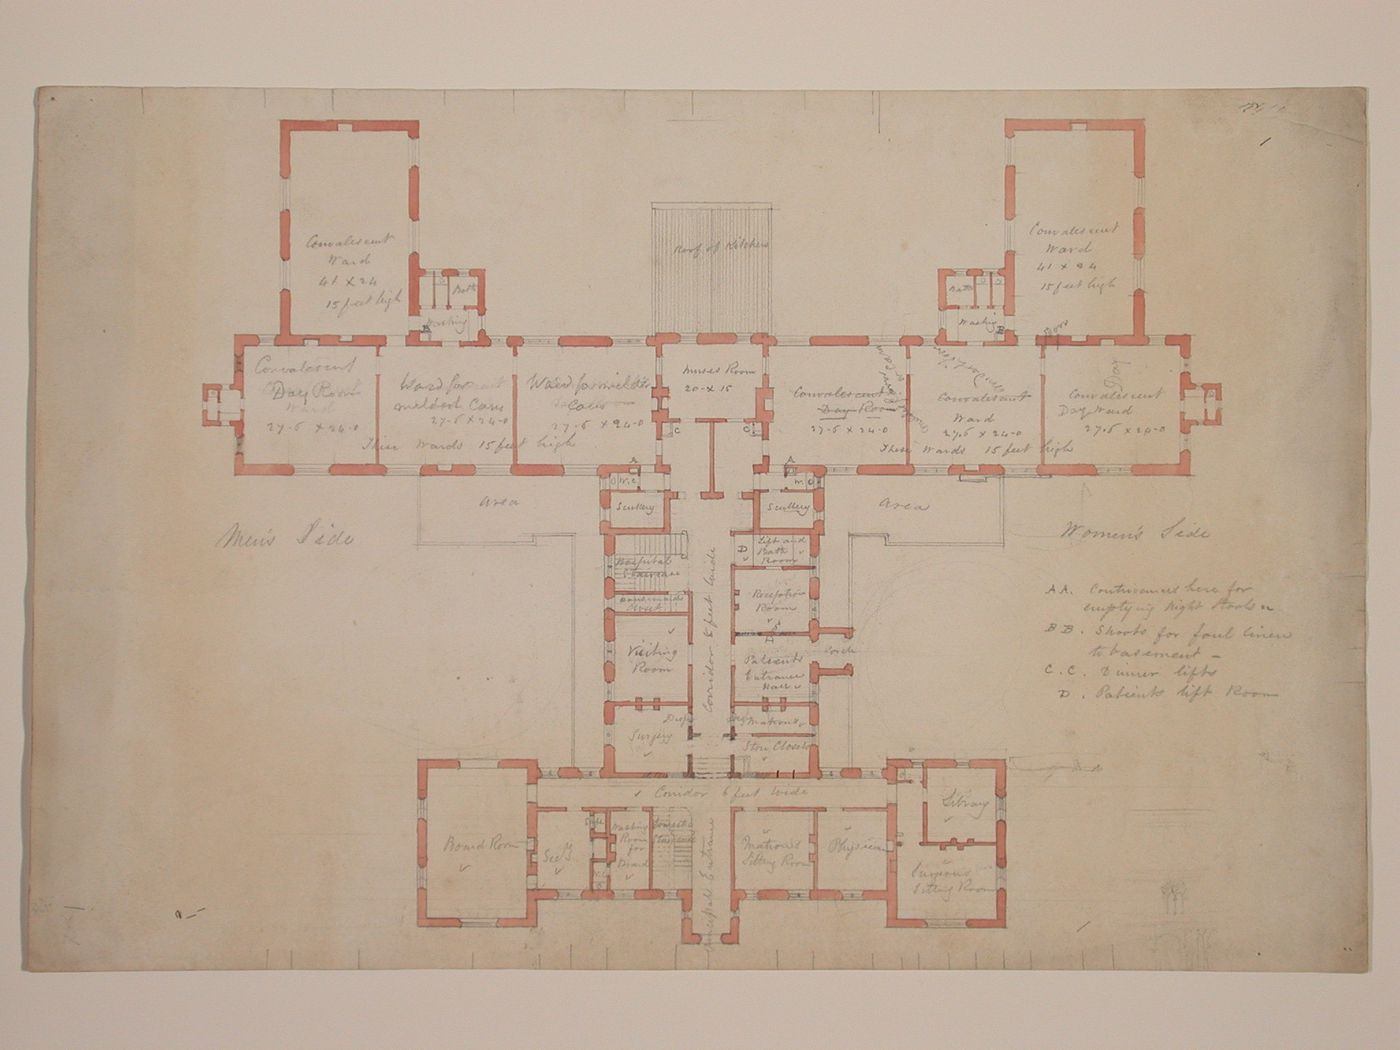 Ground plan of a hospital